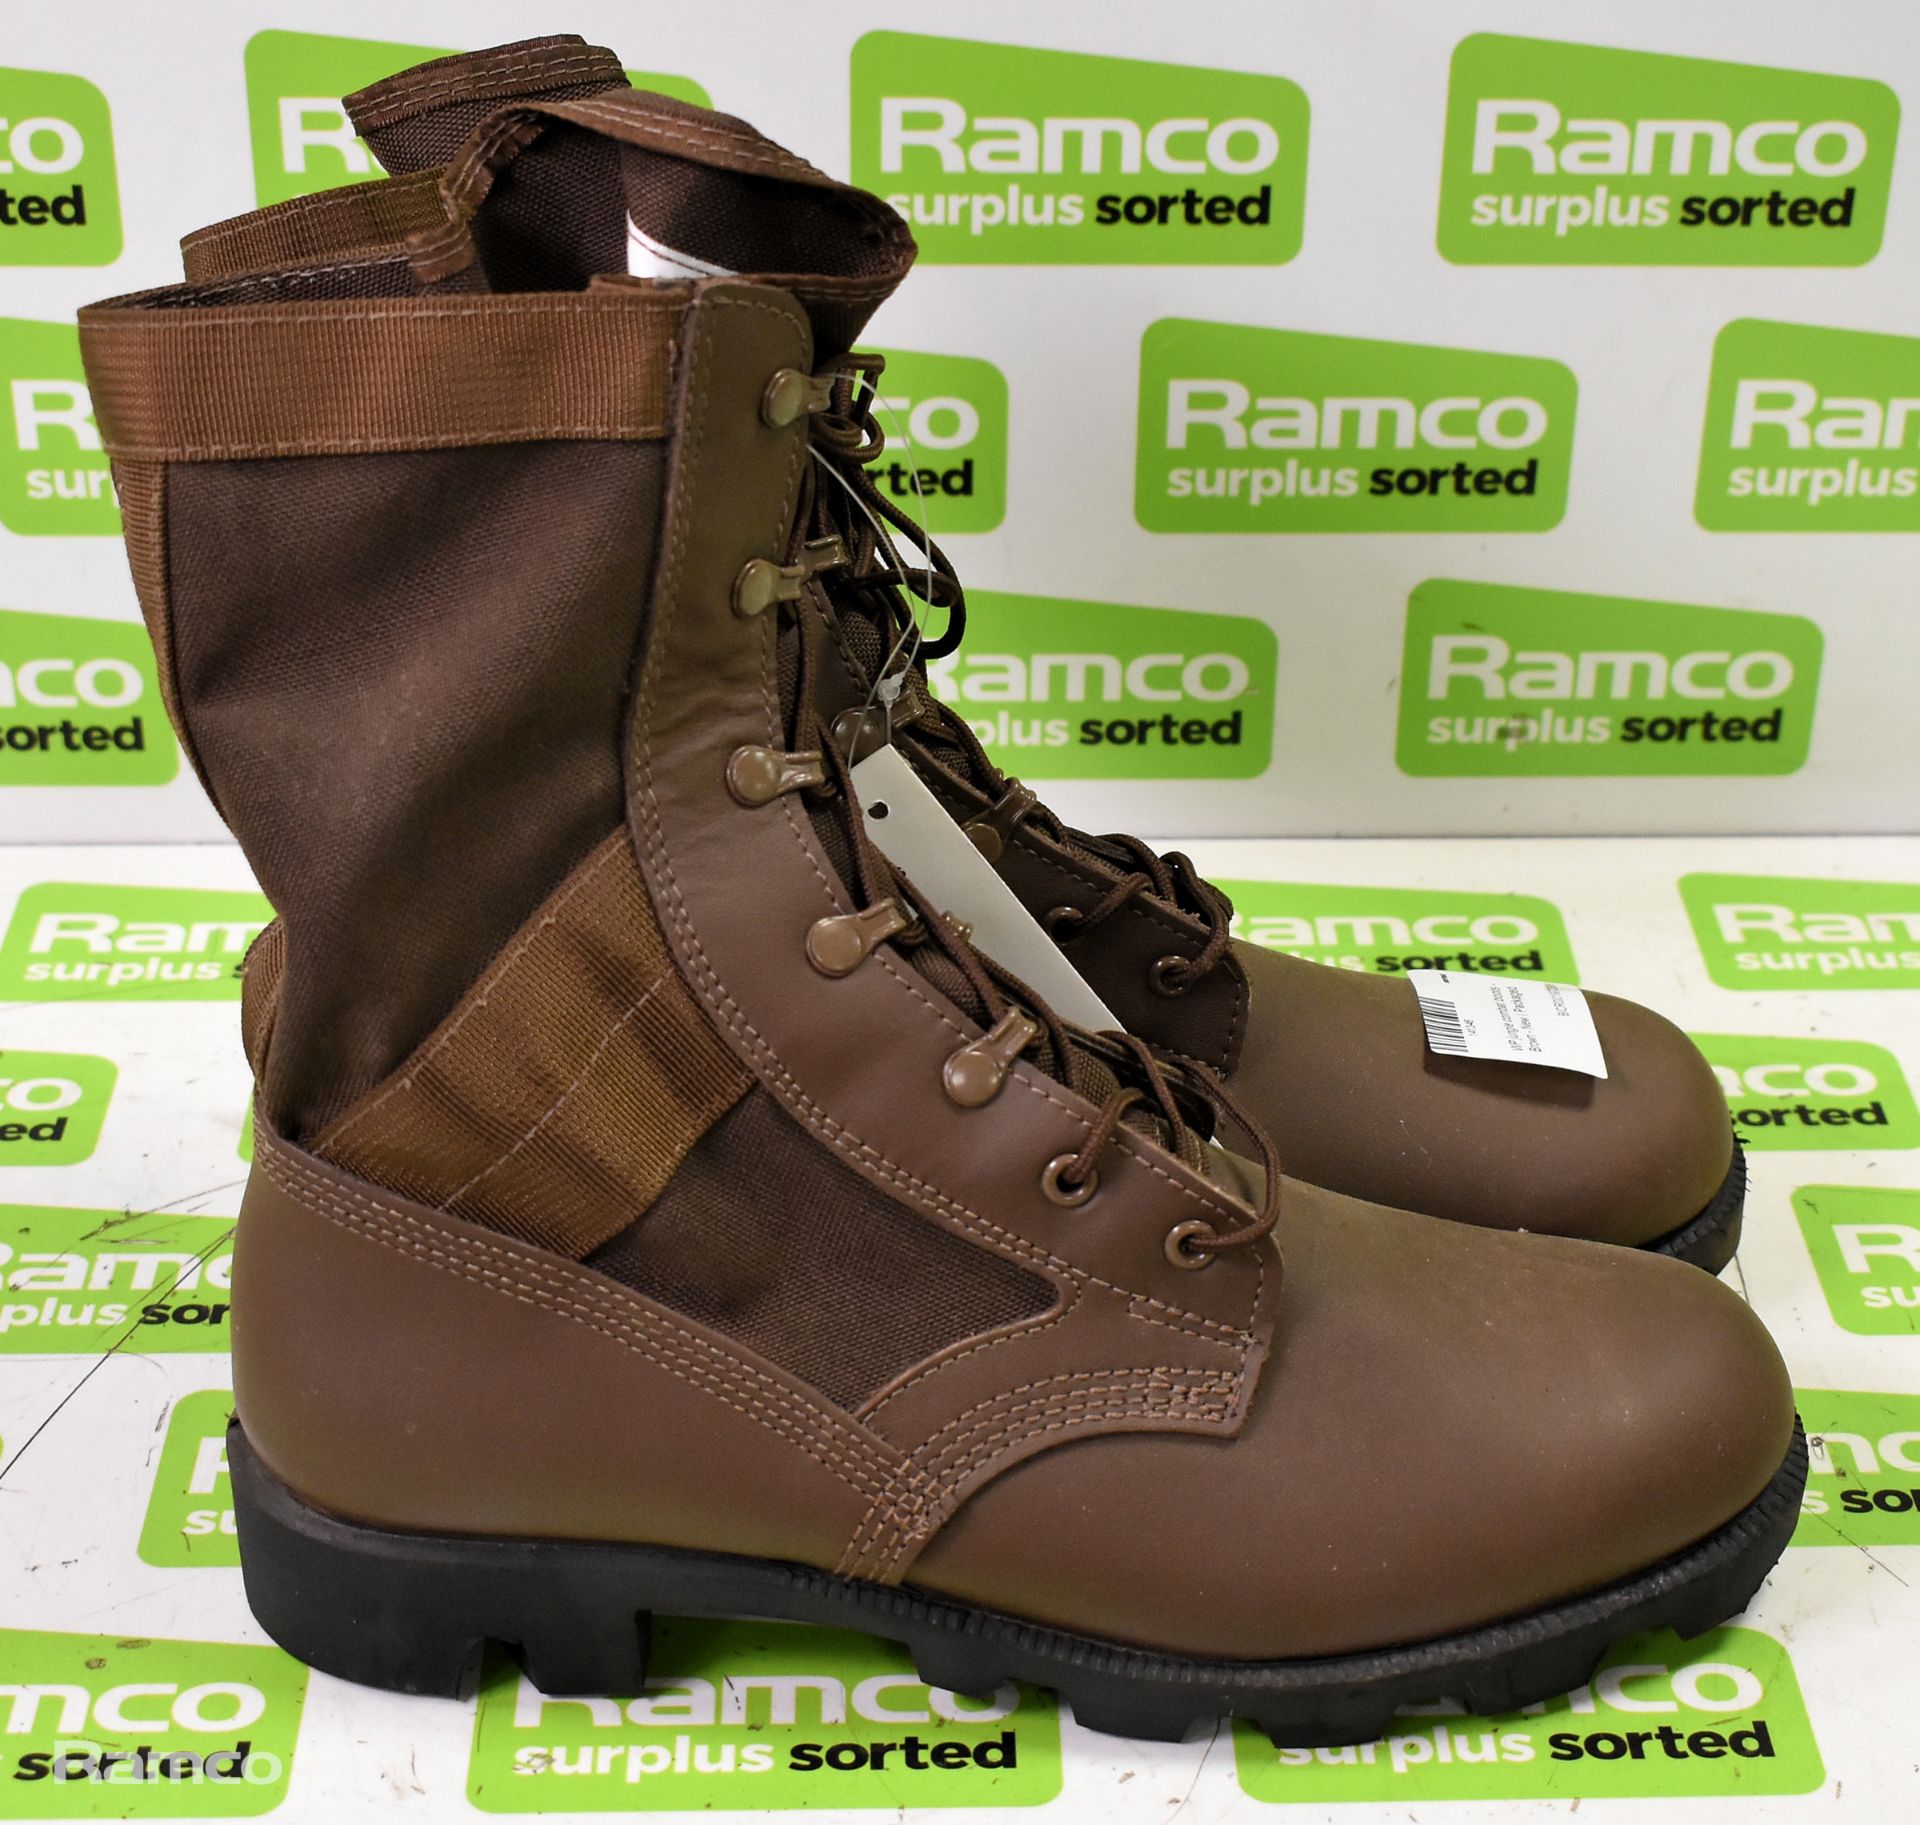 WP jungle combat boots - Brown - 9M - Image 2 of 5